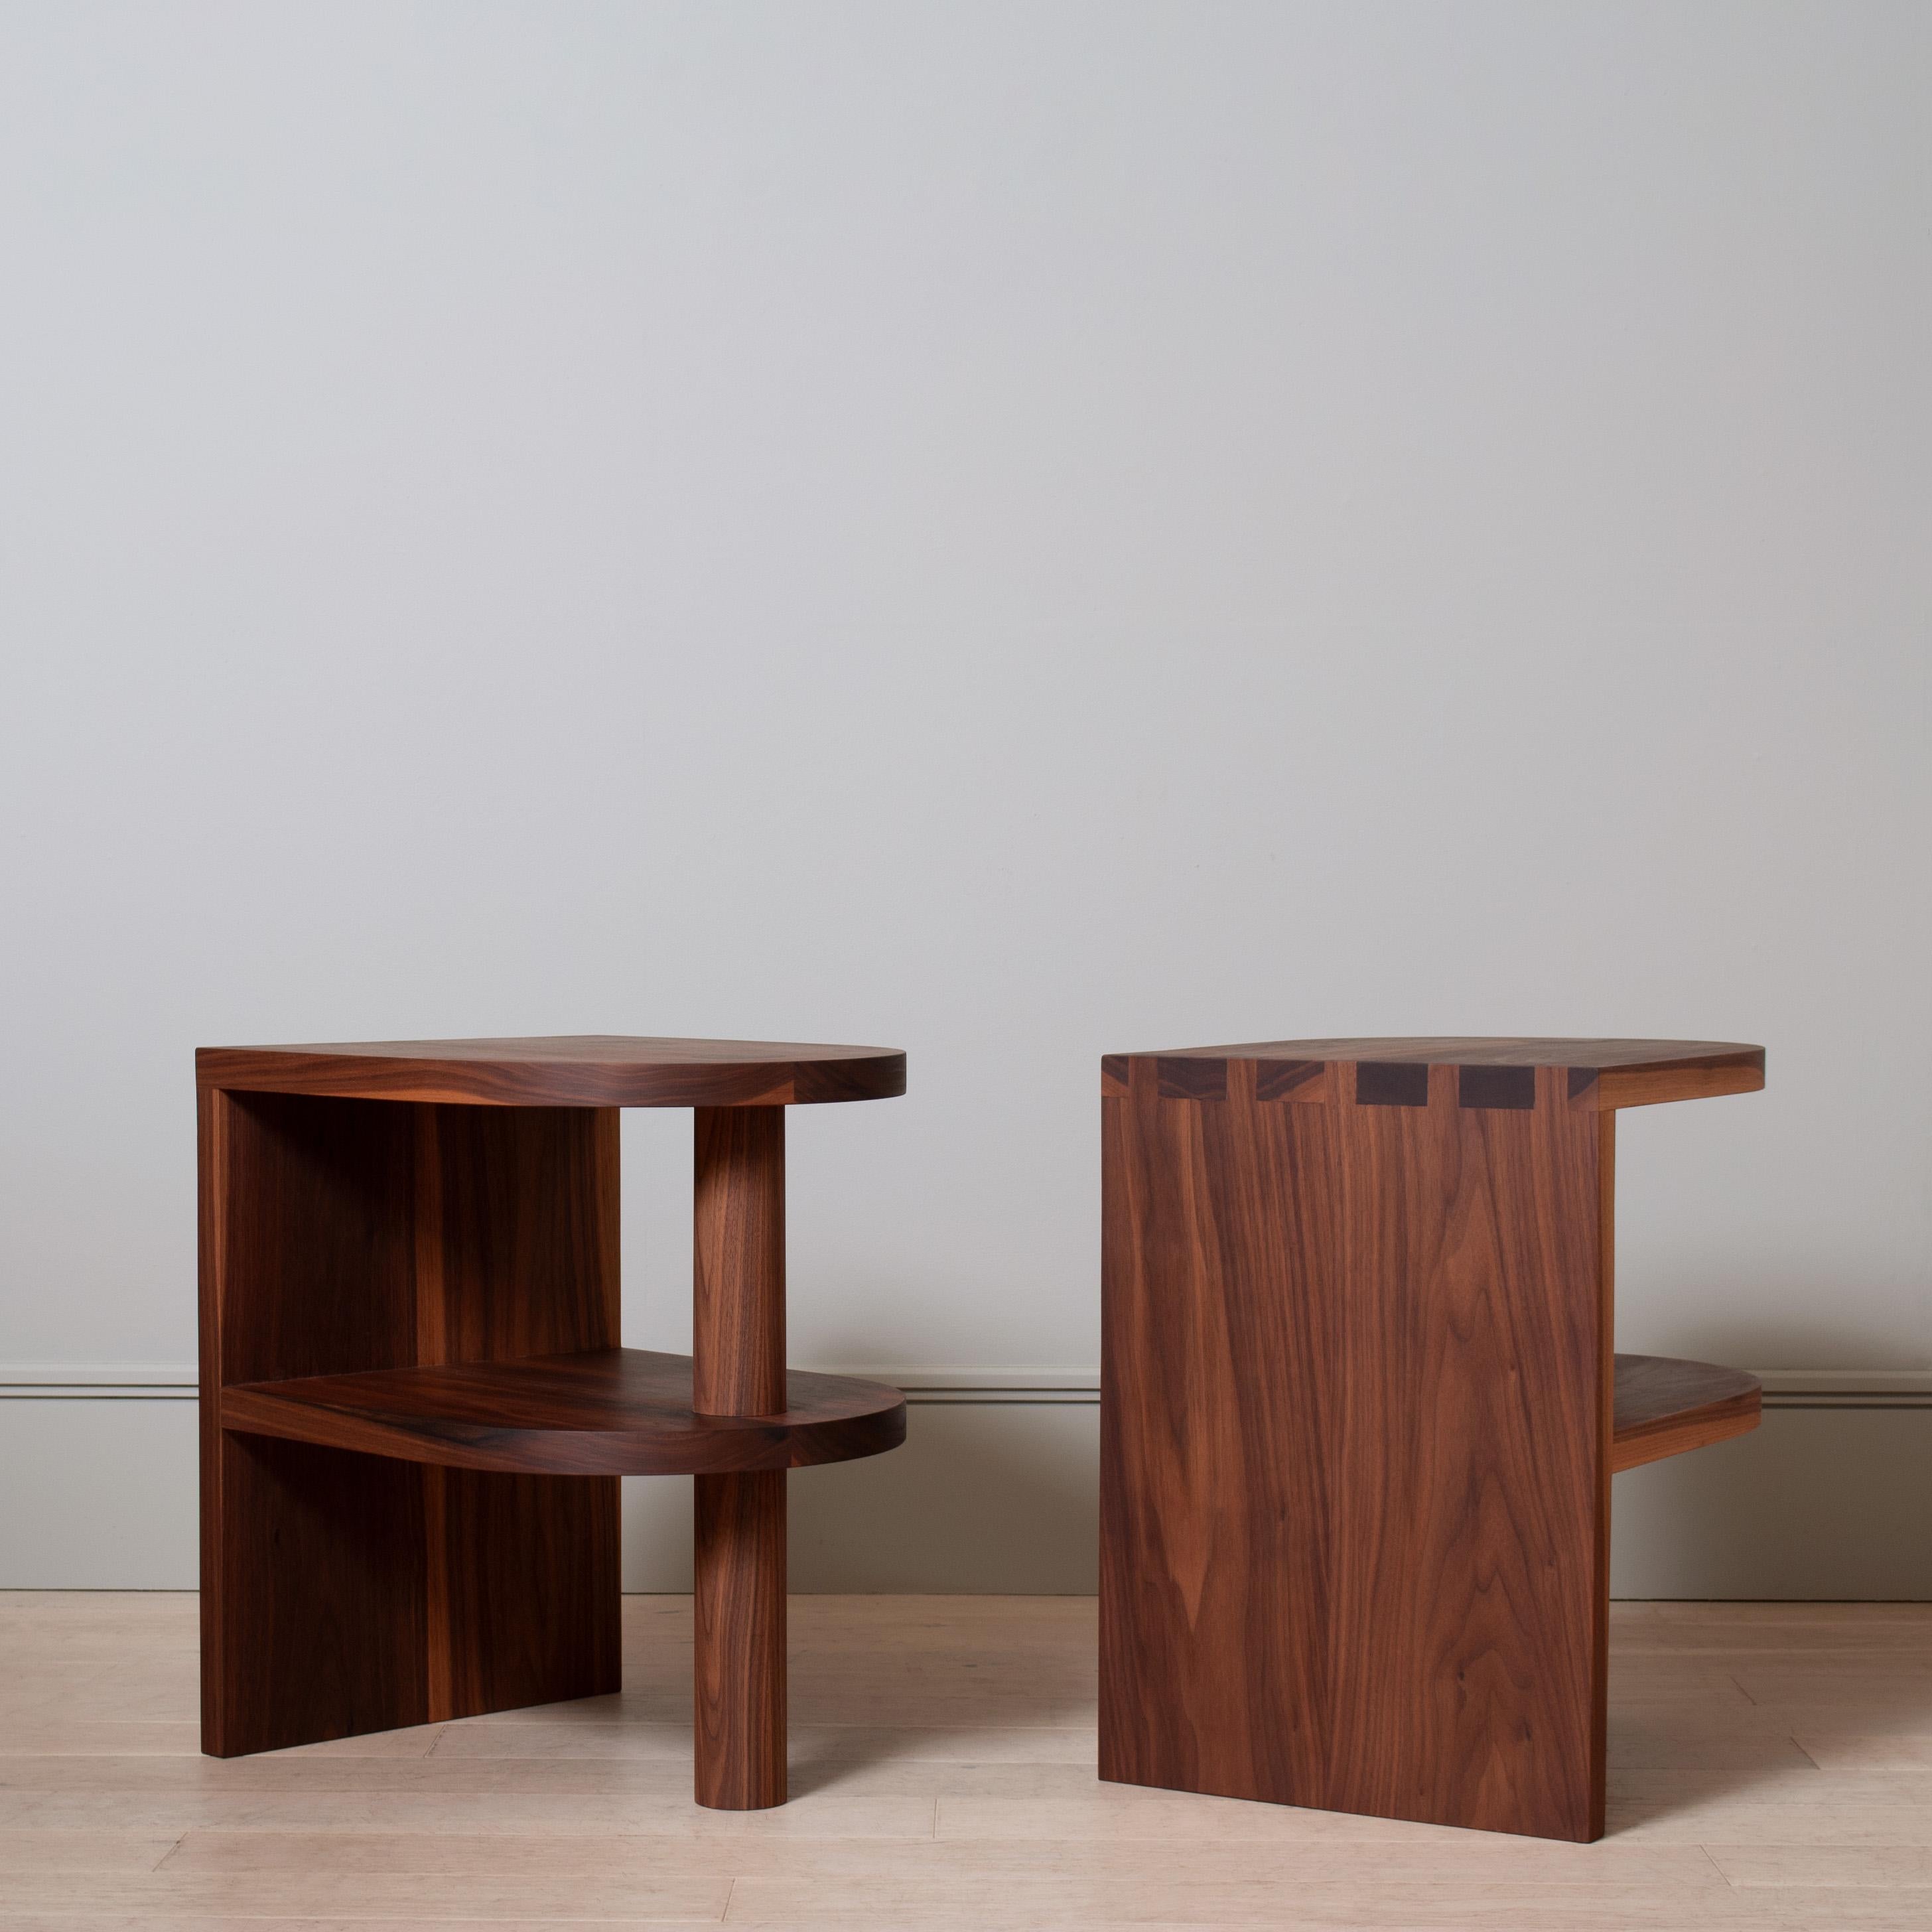 Handcrafted architectural American black walnut nightstands. Designed at Sum furniture and handcrafted using traditional furniture making techniques with the finest American Black Walnut. Hand-cut oversized dovetail jointing detail with a thick